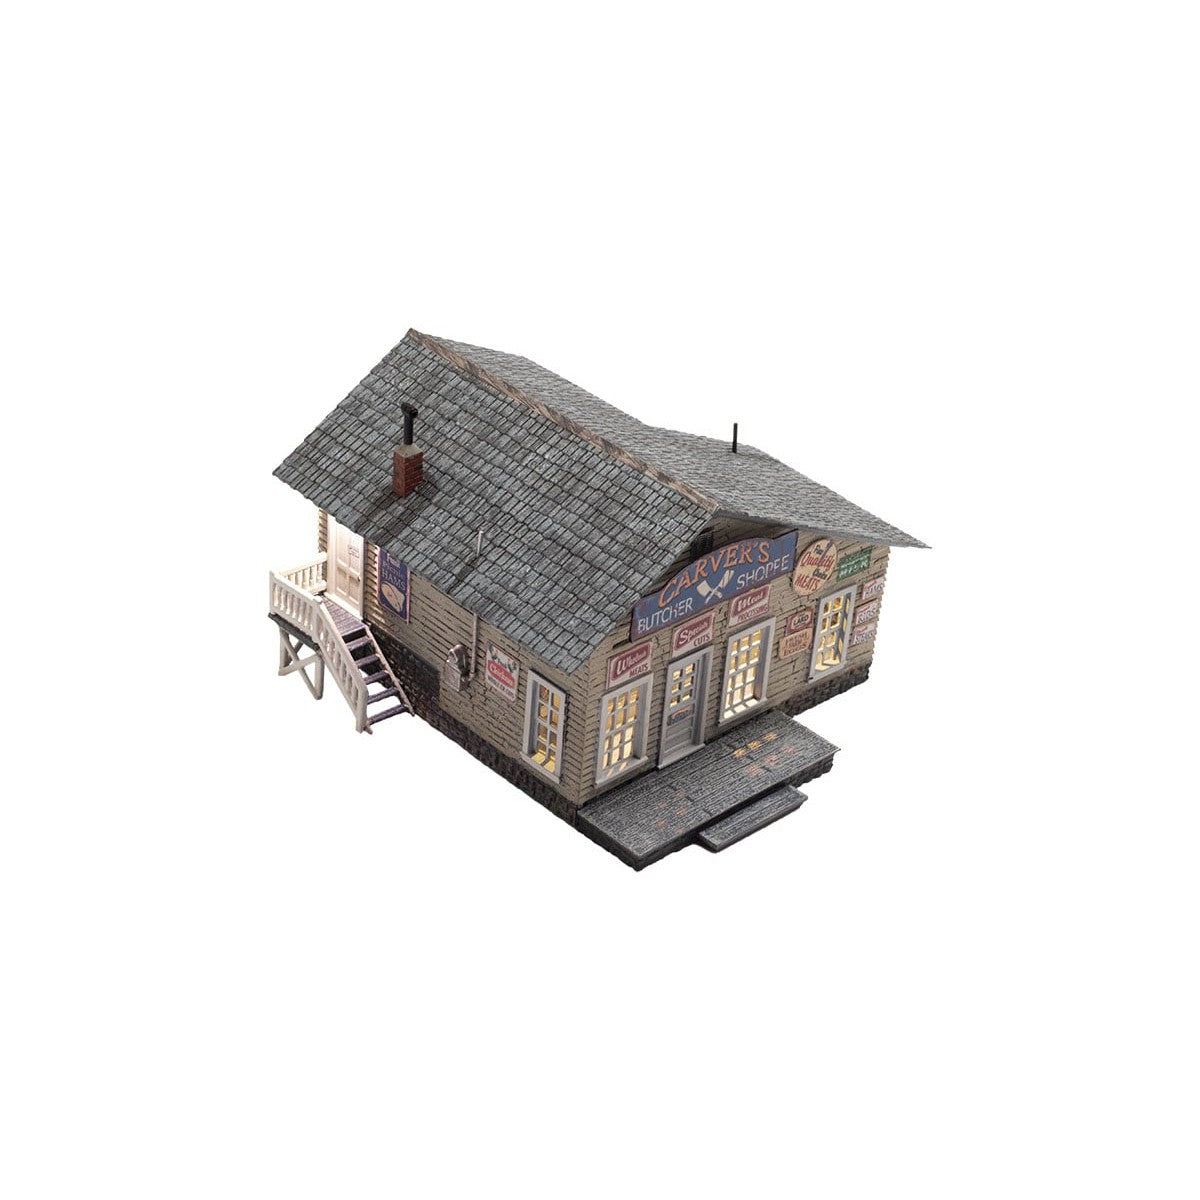 Woodland Scenics O Scale Carver’s Butcher Shoppe Built and Ready